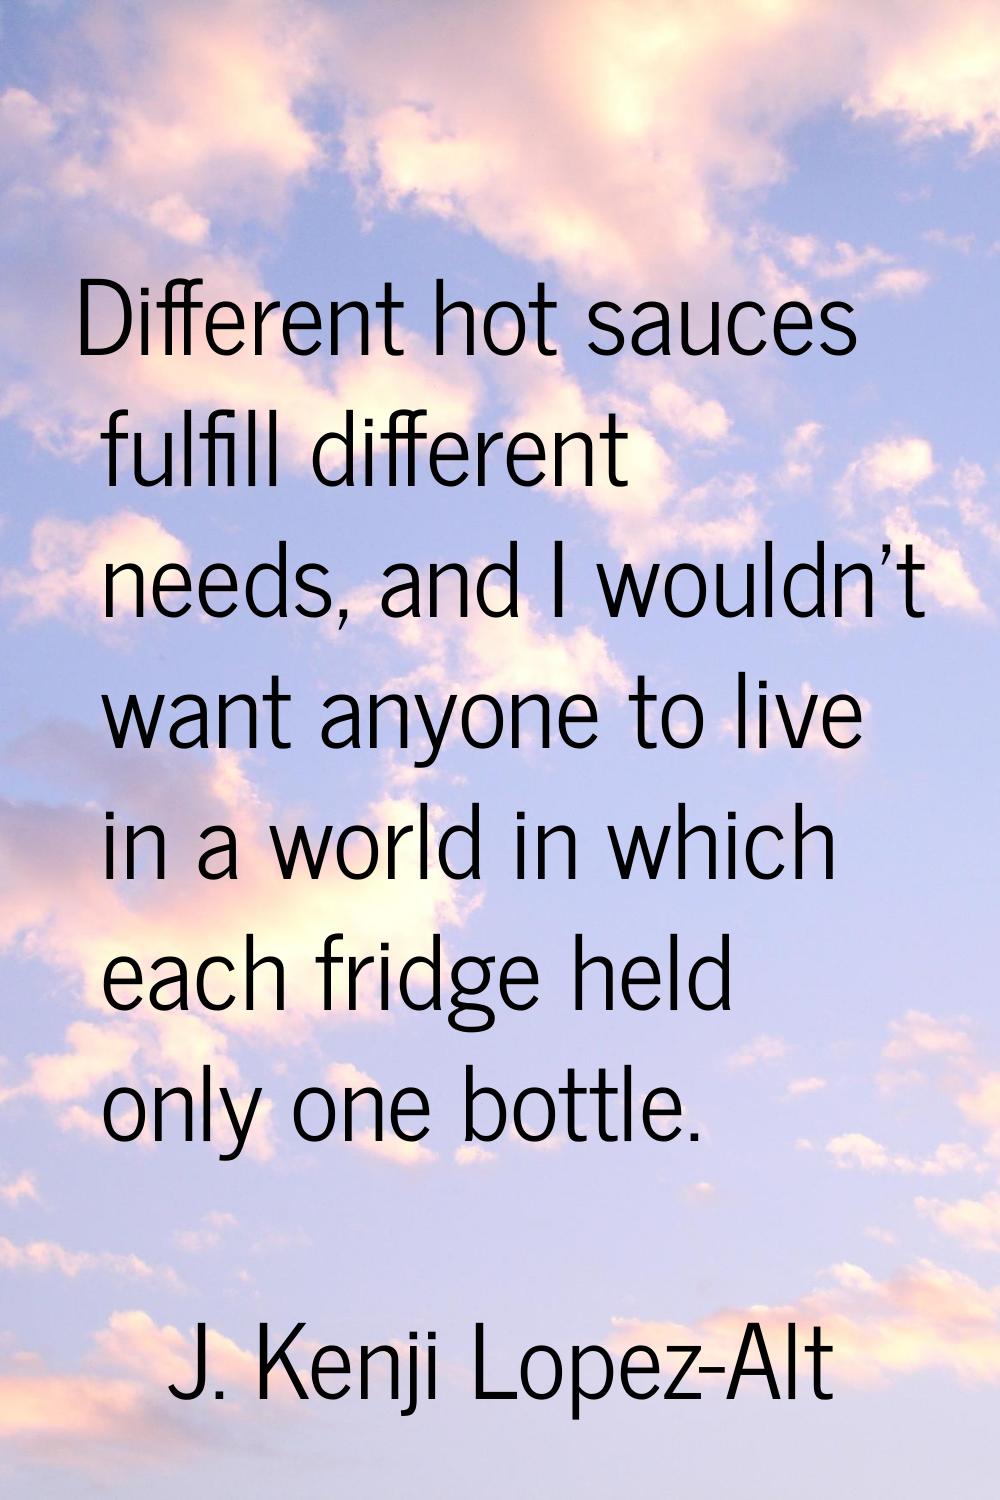 Different hot sauces fulfill different needs, and I wouldn't want anyone to live in a world in whic